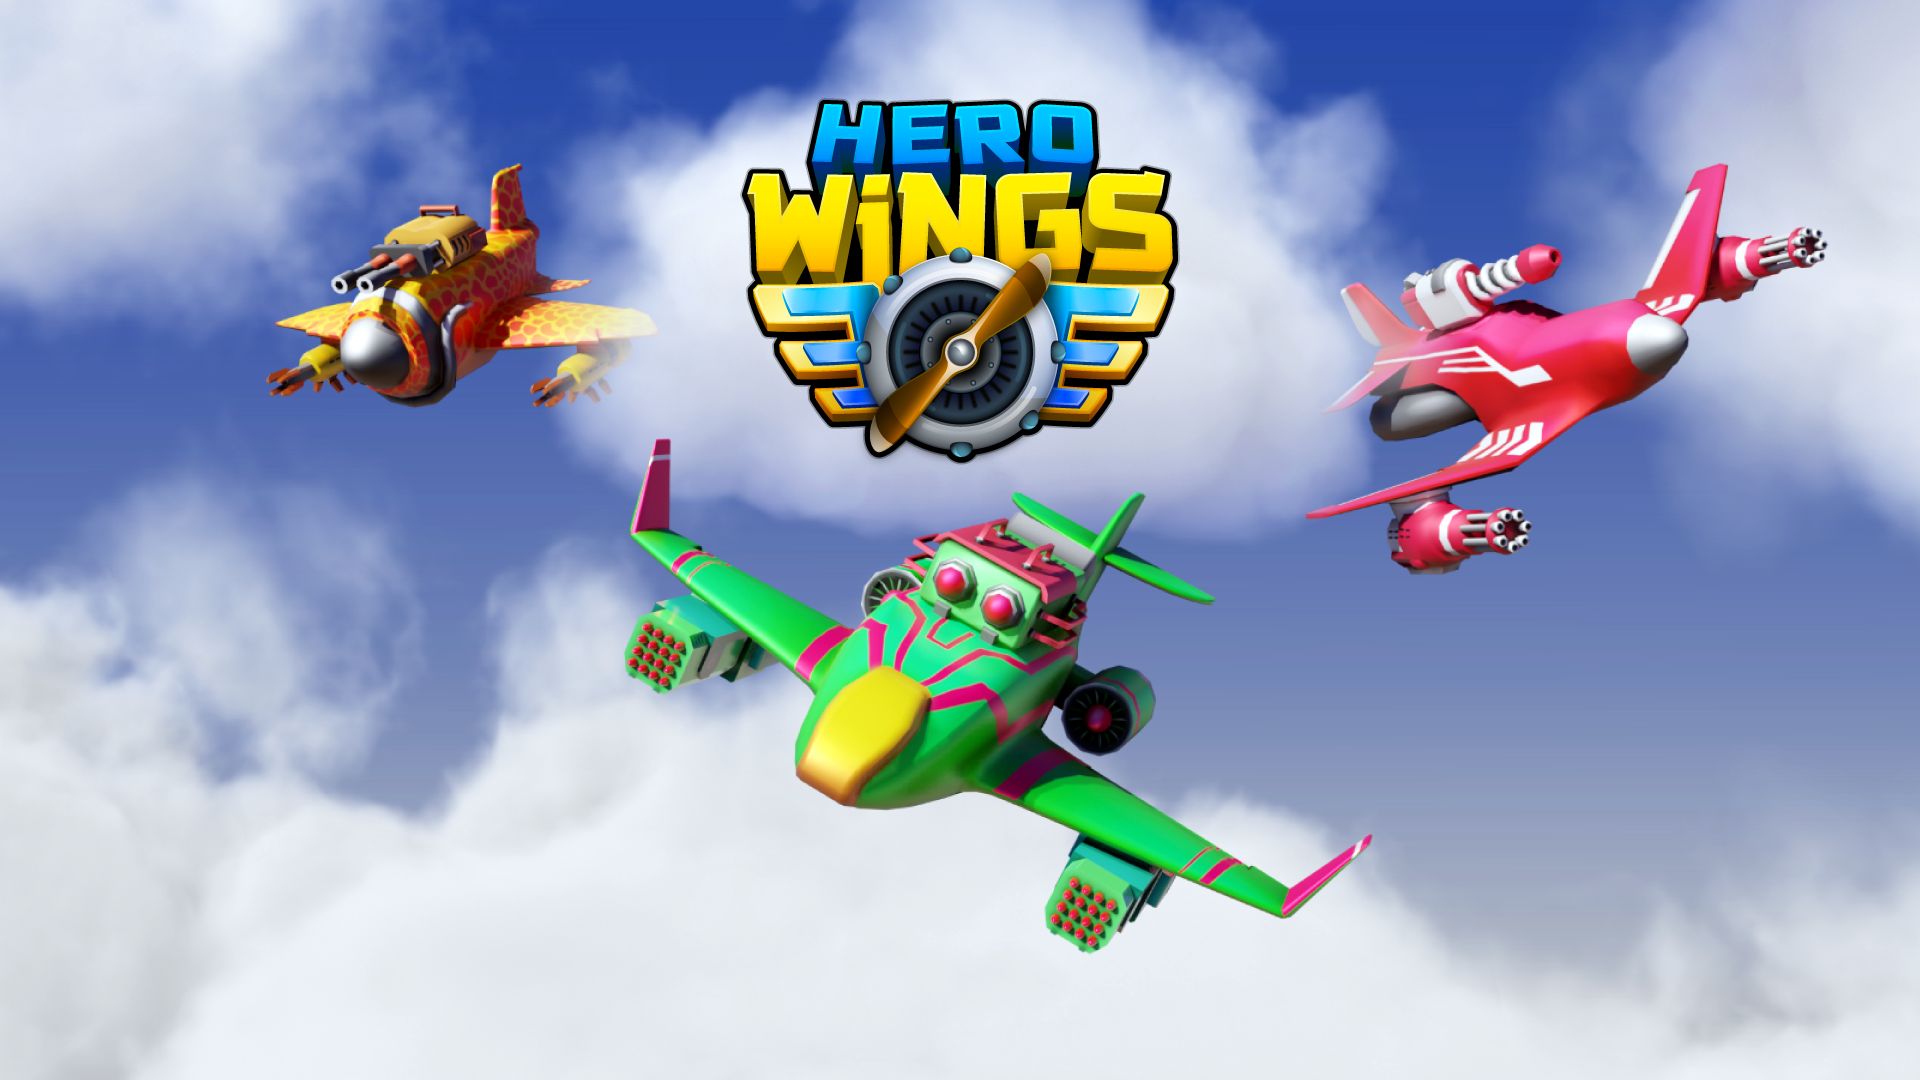 Download game Hero Wings for Android free | 9LifeHack.com